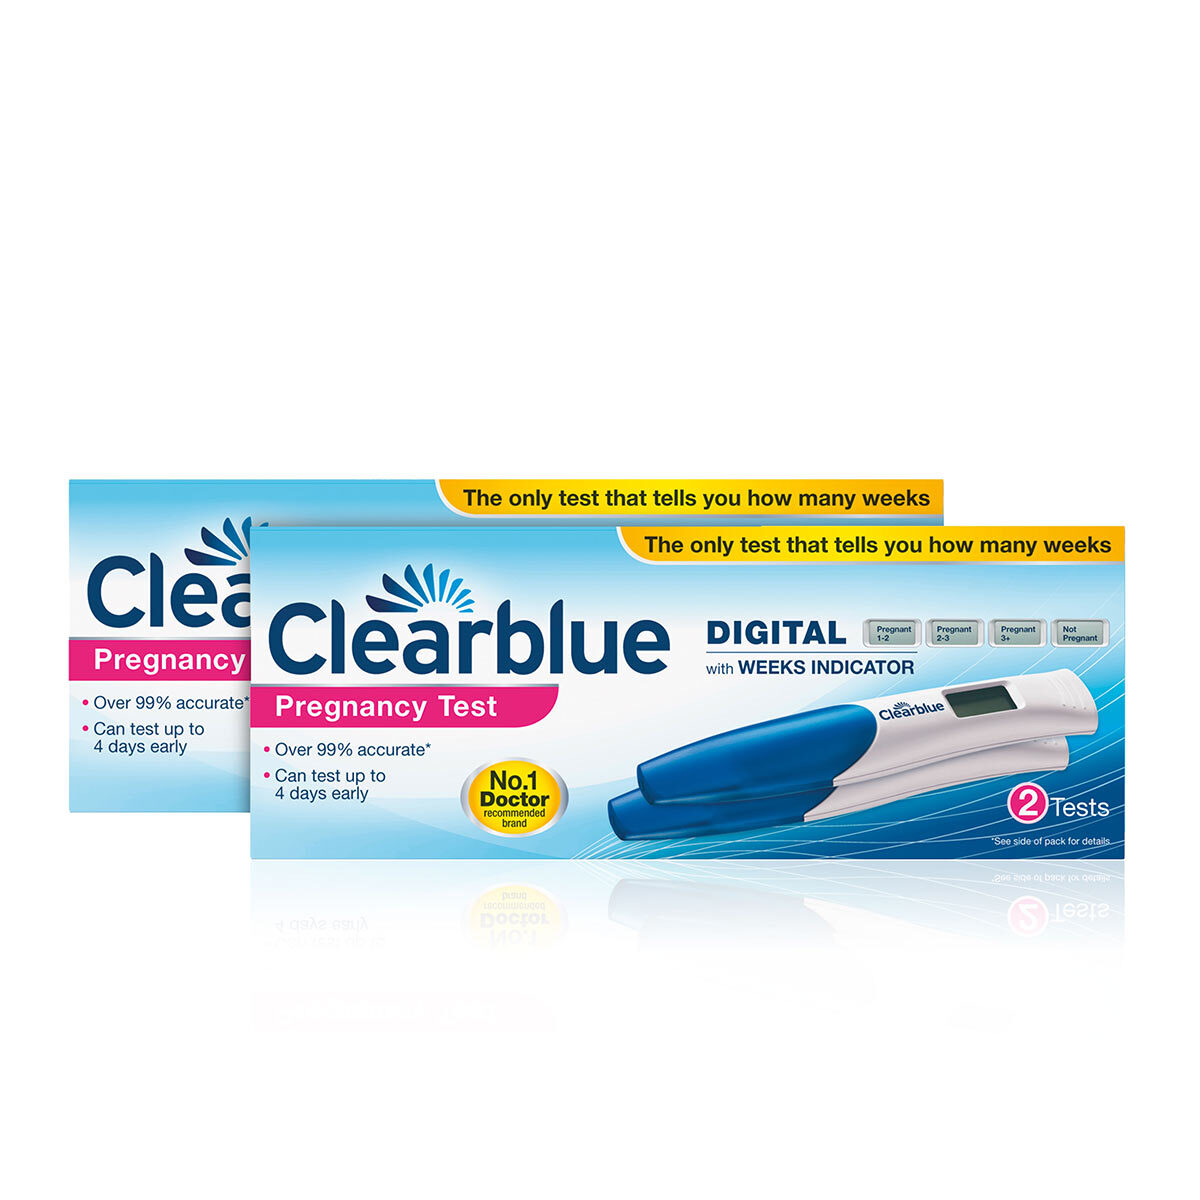 Pregnancy clearblue test digital What Does